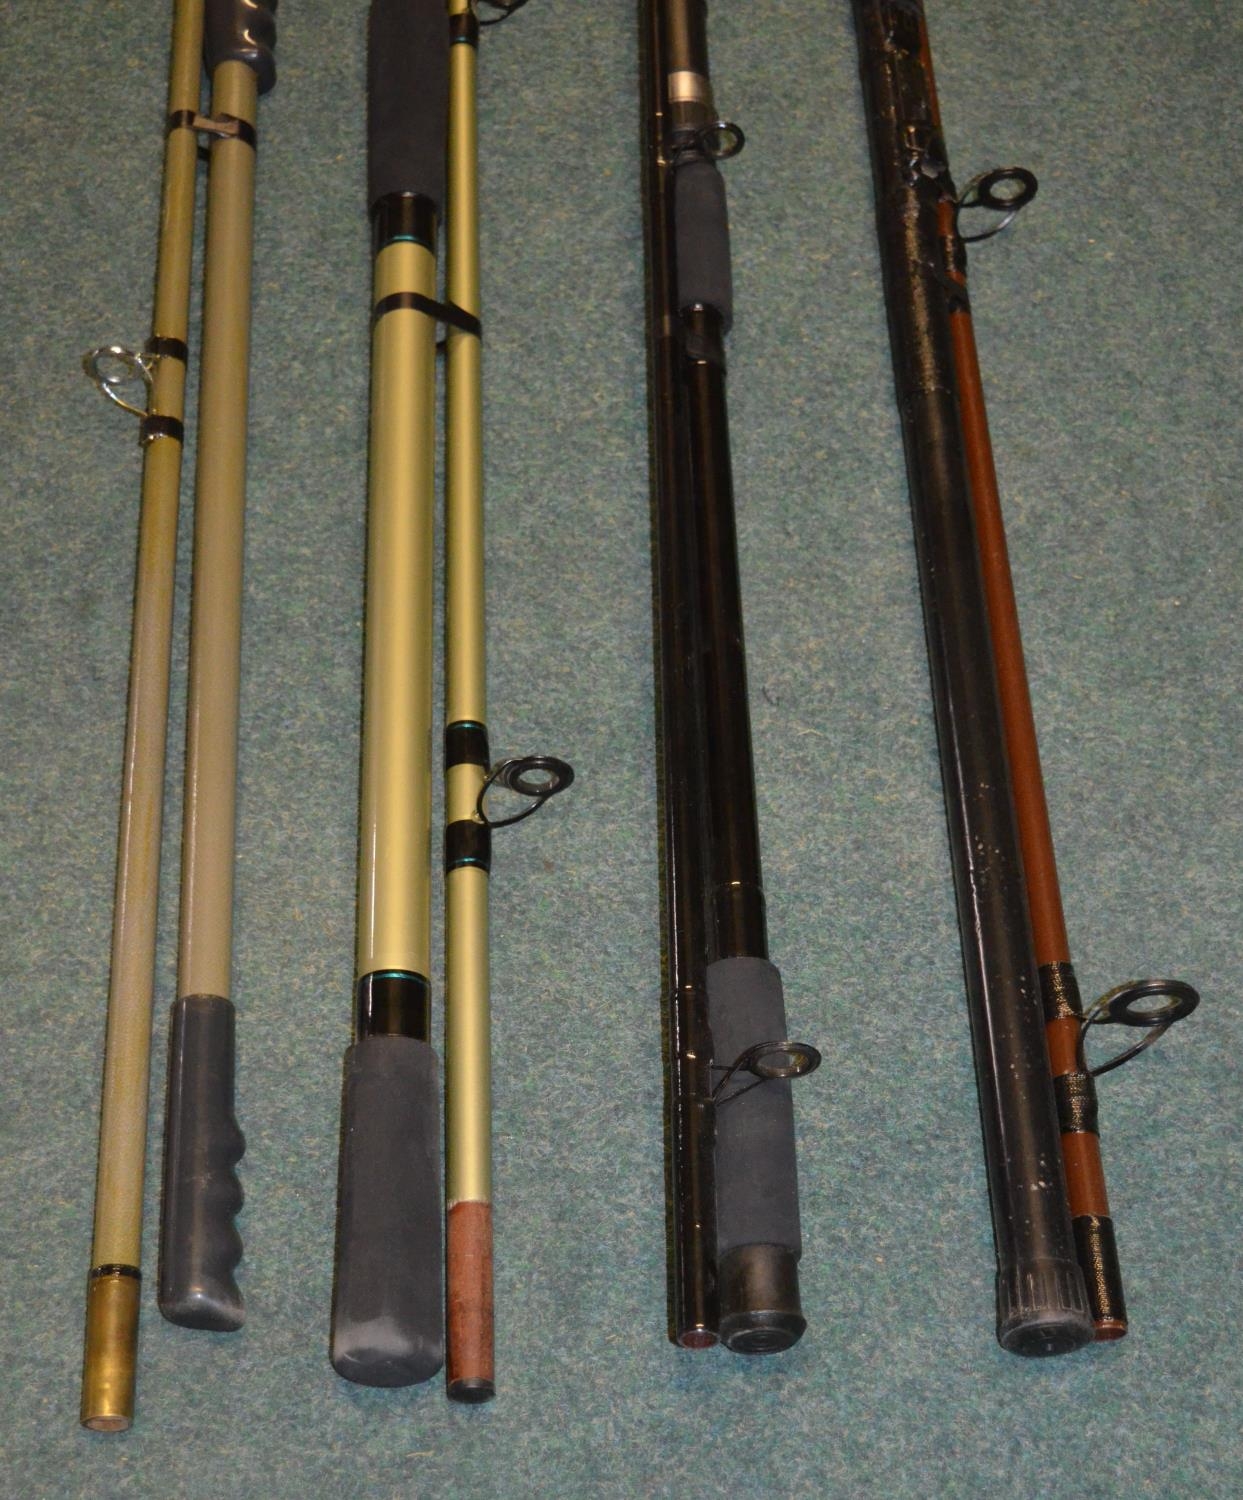 4 carbon fibre 2 piece fishing rods - modern Shakespeare 12ft "In2 Beachcaster", vintage "Castaway" - Image 3 of 7